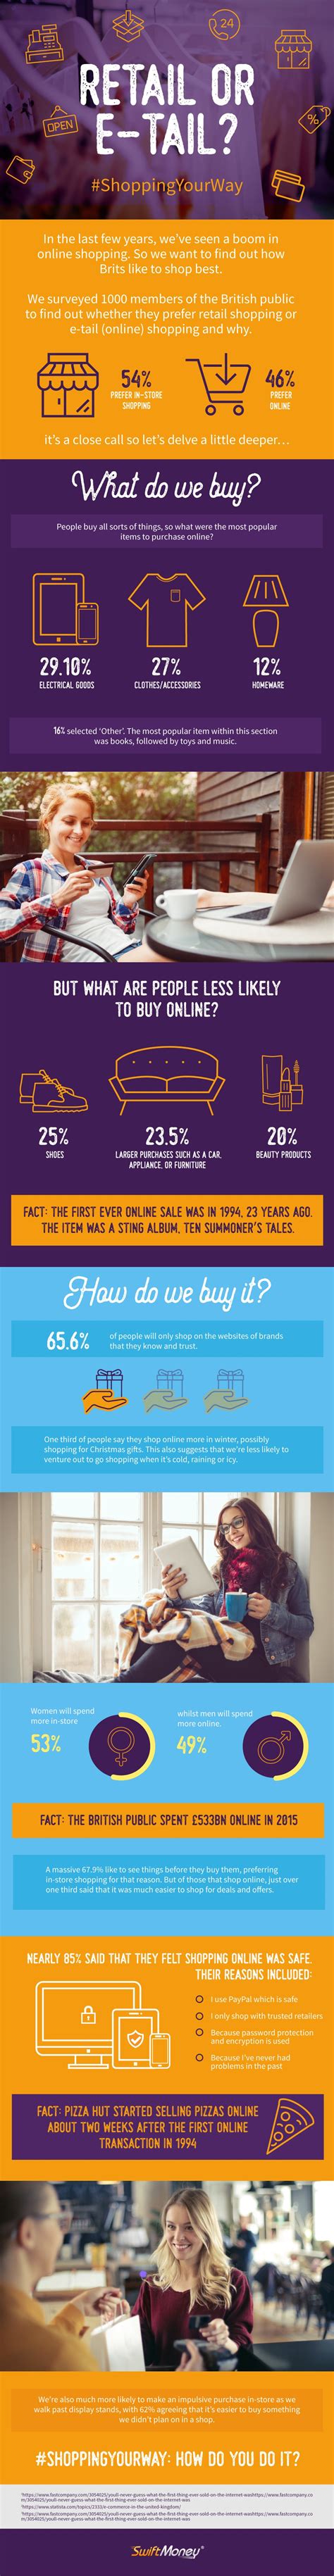 There are some advantages you can only get in a brick and mortar store. Shopping: Online vs In-Store | Online, Shopping, Financial ...